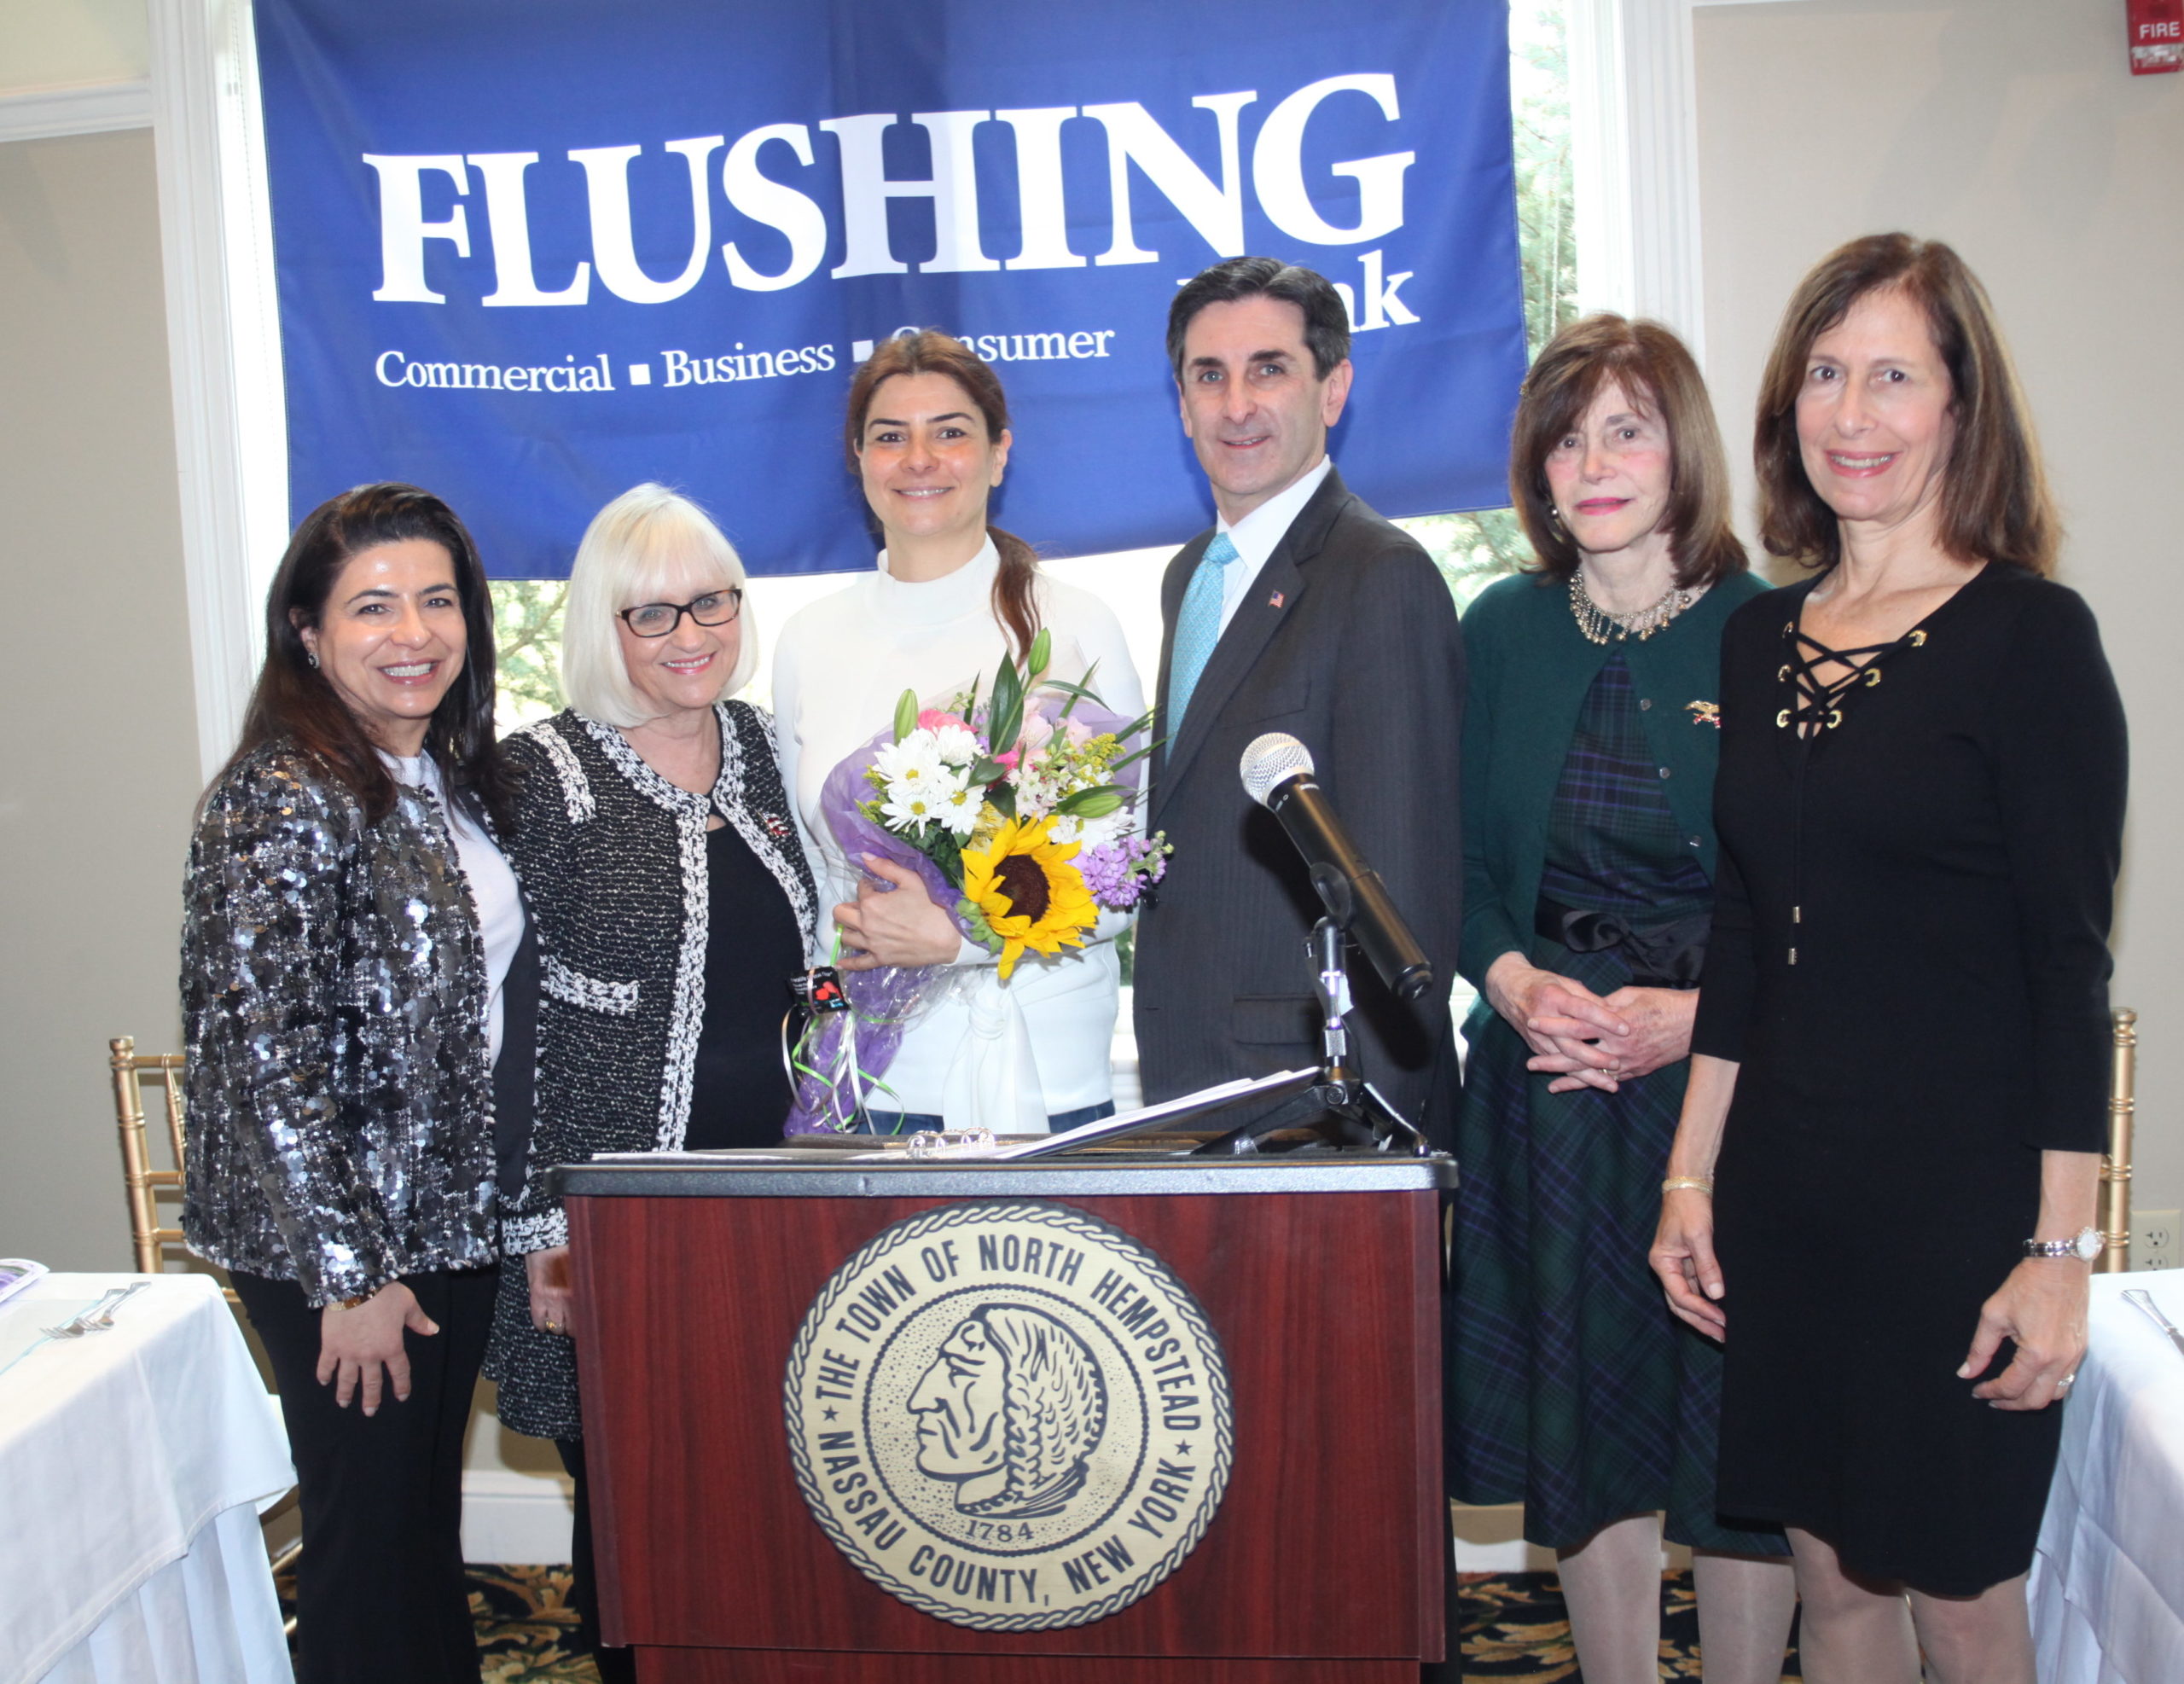 Haleh Benilevi accepts an award from the Town of North Hempstead on behalf of her mother Lida Edalati. (Photo courtesy of the Town of North Hempstead)